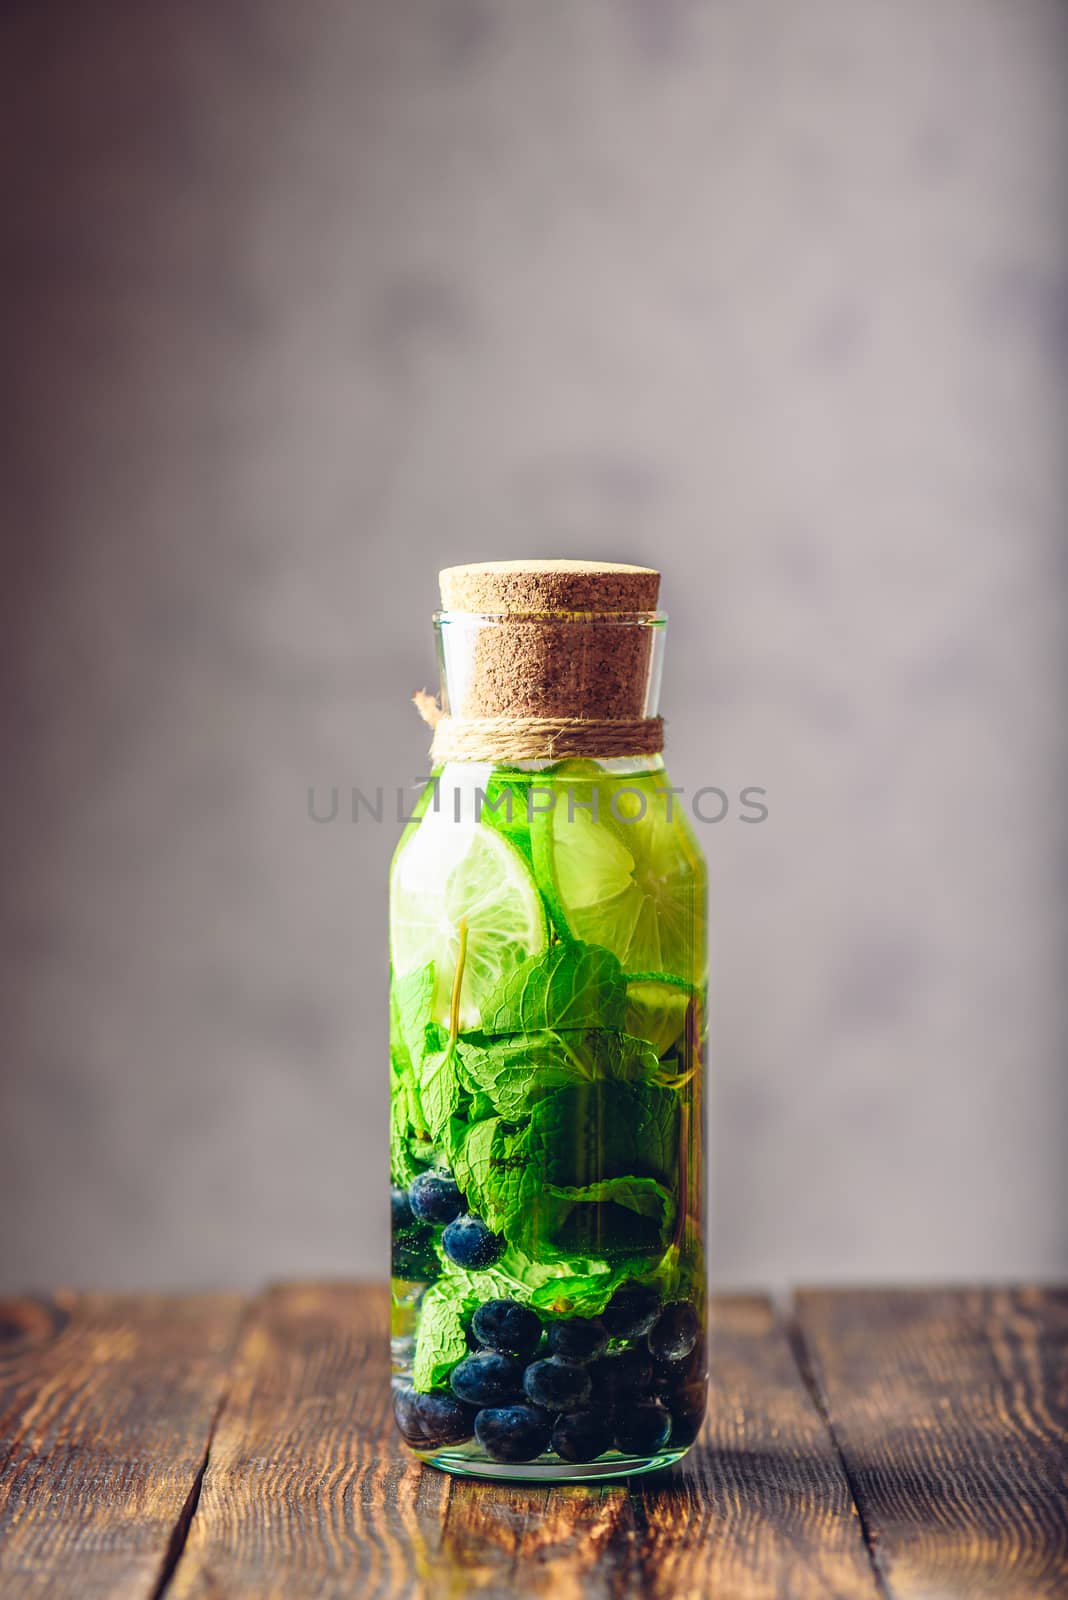 Bottle of Cleansing Water with Lime, Mint and Blueberry. Copy Space and Vertical Orientation.